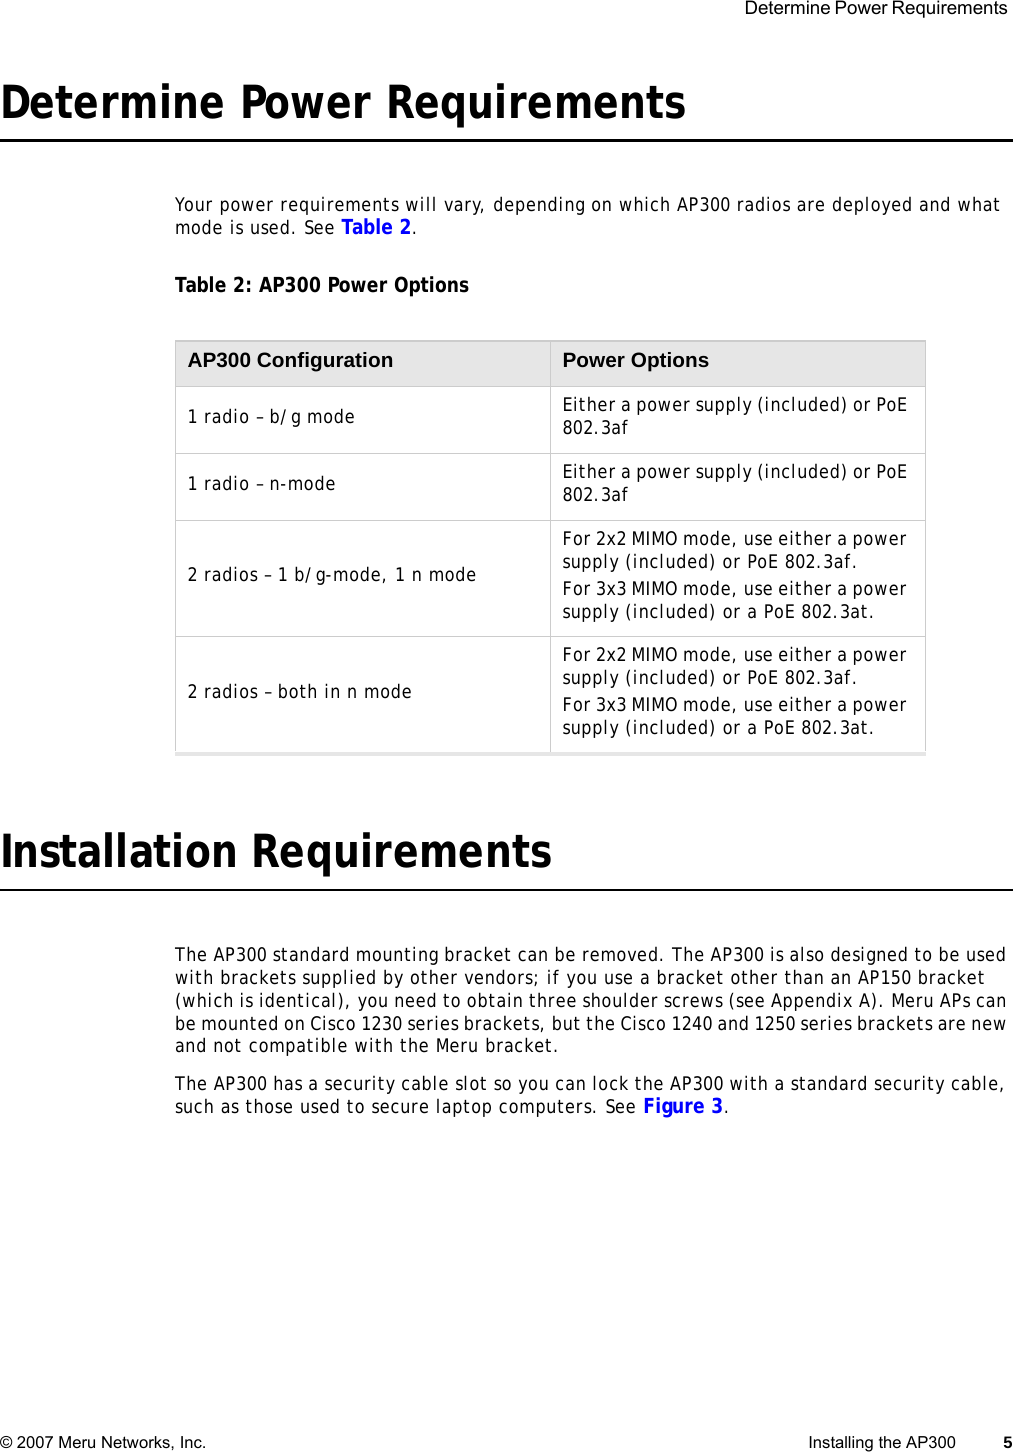  Determine Power Requirements © 2007 Meru Networks, Inc. Installing the AP300 5 Determine Power RequirementsYour power requirements will vary, depending on which AP300 radios are deployed and what mode is used. See Table 2. Table 2: AP300 Power OptionsInstallation RequirementsThe AP300 standard mounting bracket can be removed. The AP300 is also designed to be used with brackets supplied by other vendors; if you use a bracket other than an AP150 bracket (which is identical), you need to obtain three shoulder screws (see Appendix A). Meru APs can be mounted on Cisco 1230 series brackets, but the Cisco 1240 and 1250 series brackets are new and not compatible with the Meru bracket. The AP300 has a security cable slot so you can lock the AP300 with a standard security cable, such as those used to secure laptop computers. See Figure 3.AP300 Configuration Power Options1 radio – b/g mode Either a power supply (included) or PoE 802.3af1 radio – n-mode Either a power supply (included) or PoE 802.3af2 radios – 1 b/g-mode, 1 n modeFor 2x2 MIMO mode, use either a power supply (included) or PoE 802.3af.For 3x3 MIMO mode, use either a power supply (included) or a PoE 802.3at.2 radios – both in n modeFor 2x2 MIMO mode, use either a power supply (included) or PoE 802.3af.For 3x3 MIMO mode, use either a power supply (included) or a PoE 802.3at.